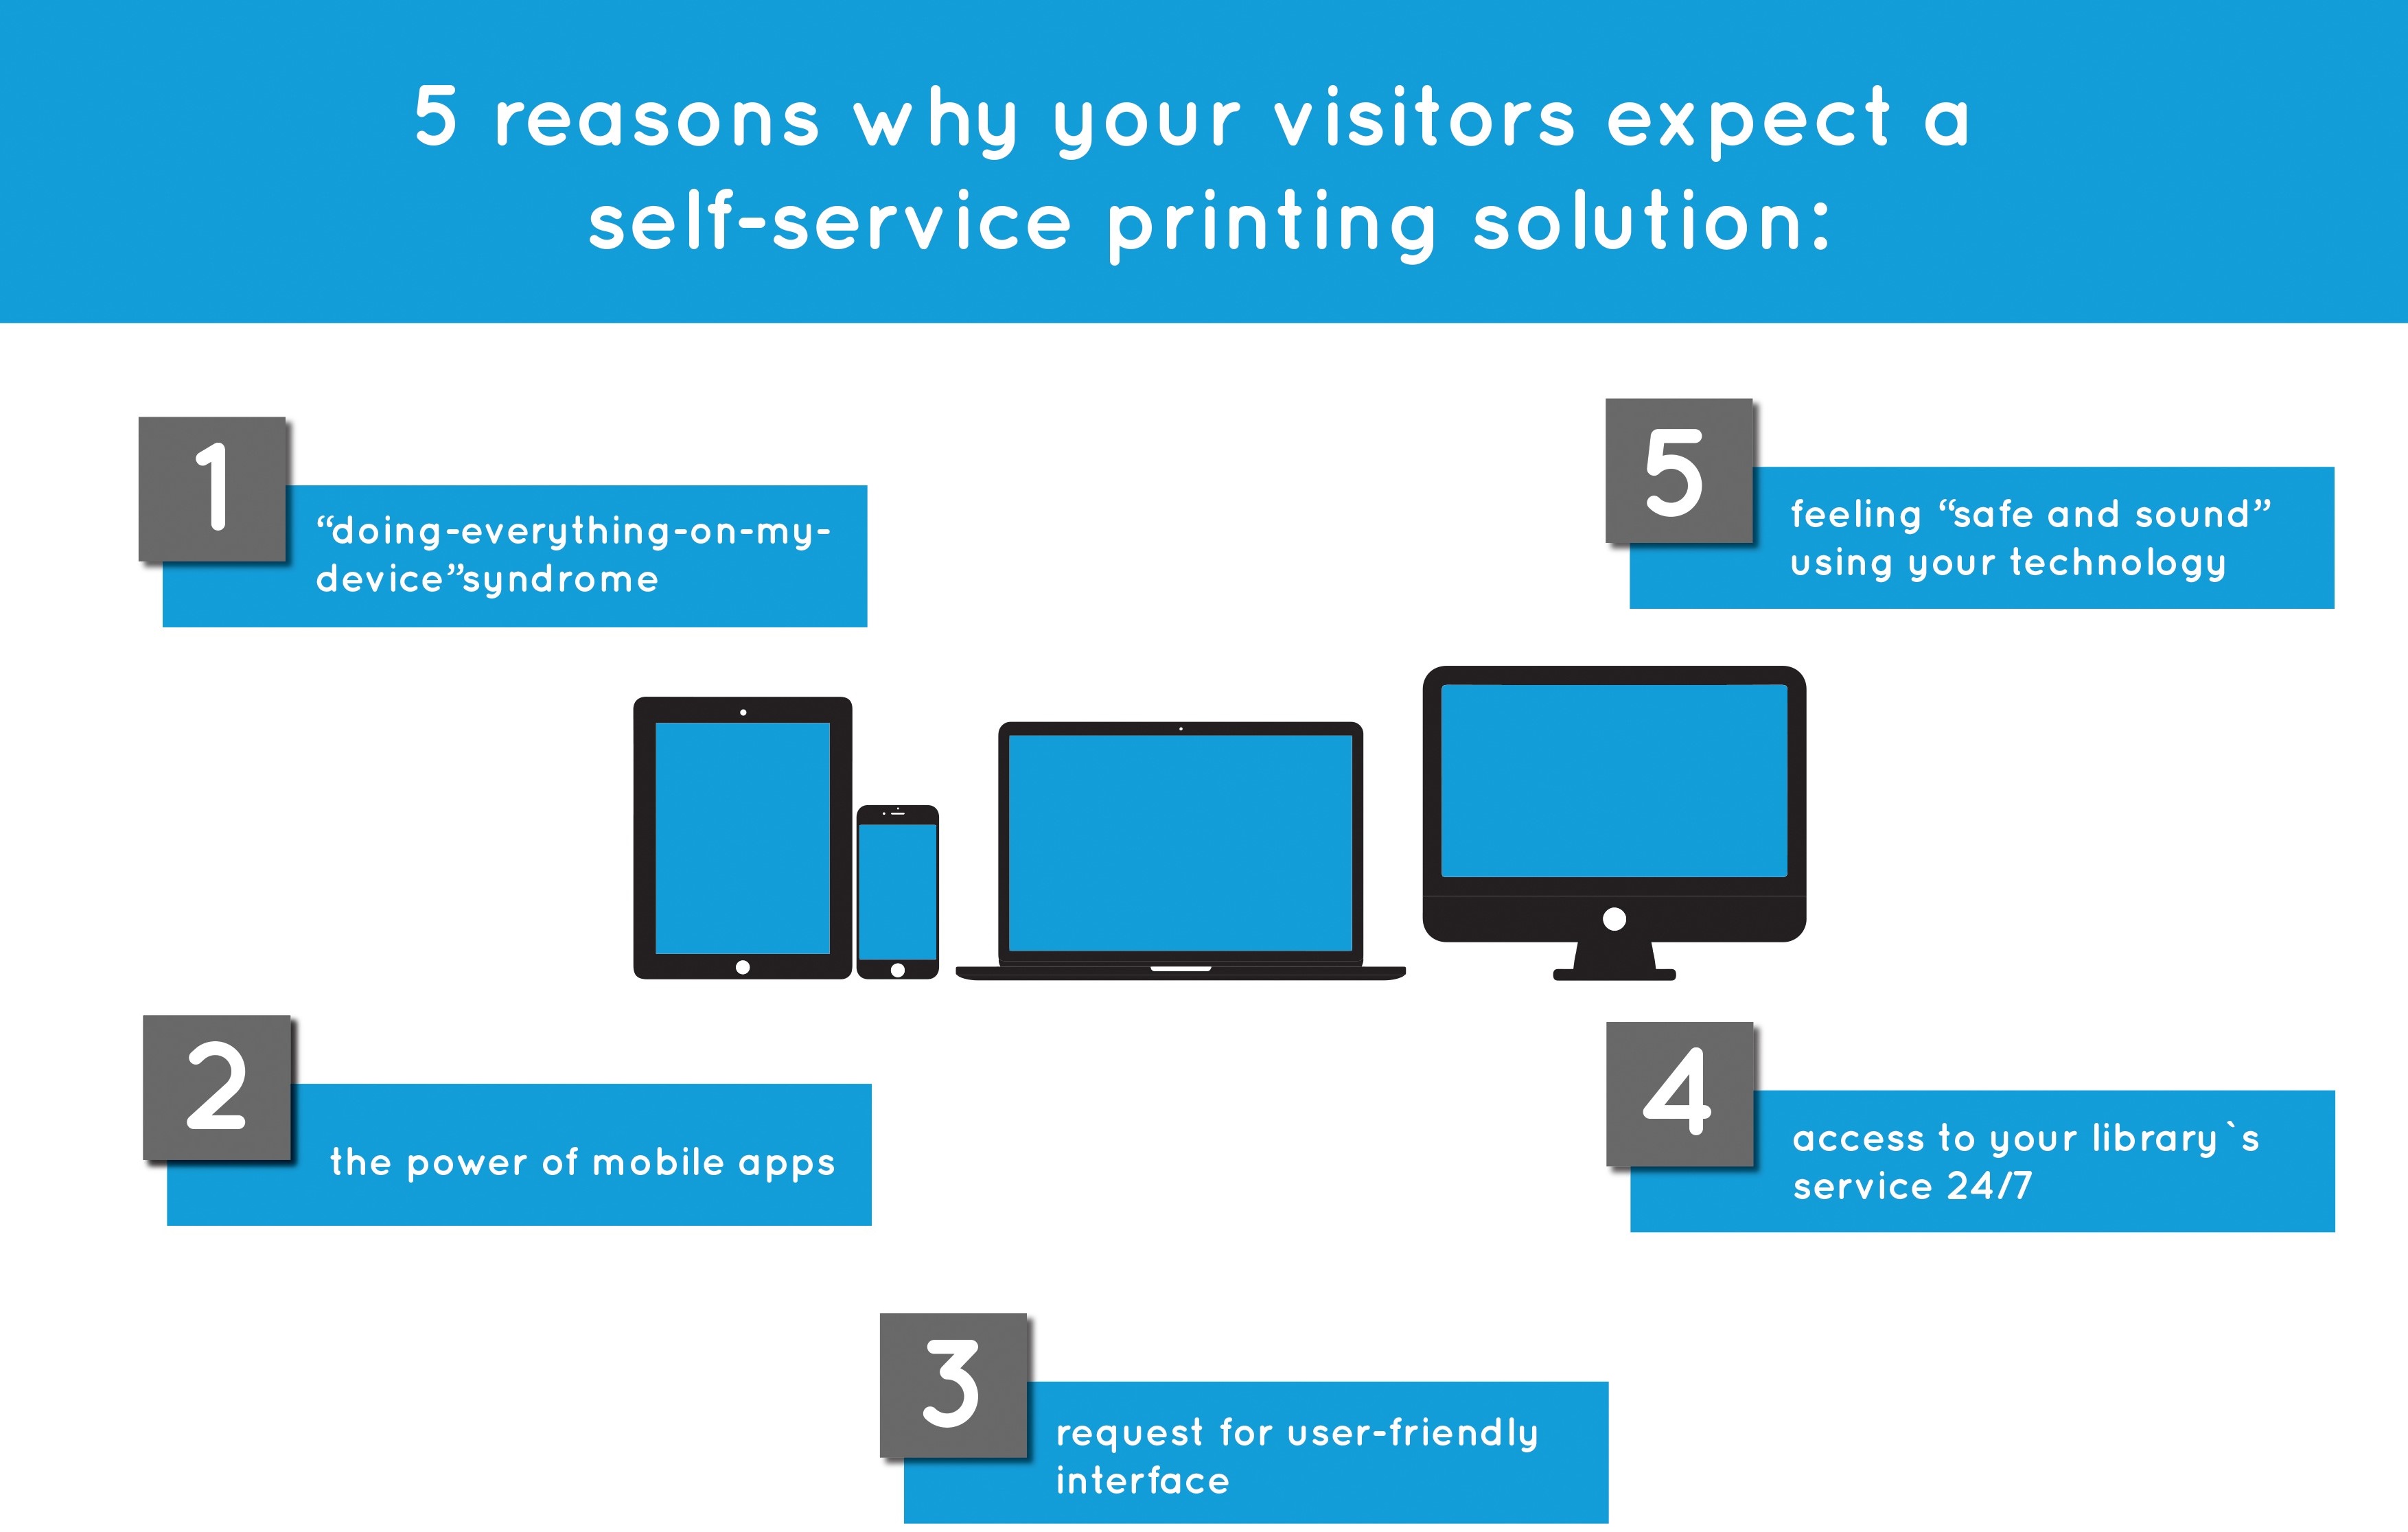 5 Reasons Why Patrons Expect A Self Service Printing Solution (from Public Libraries)